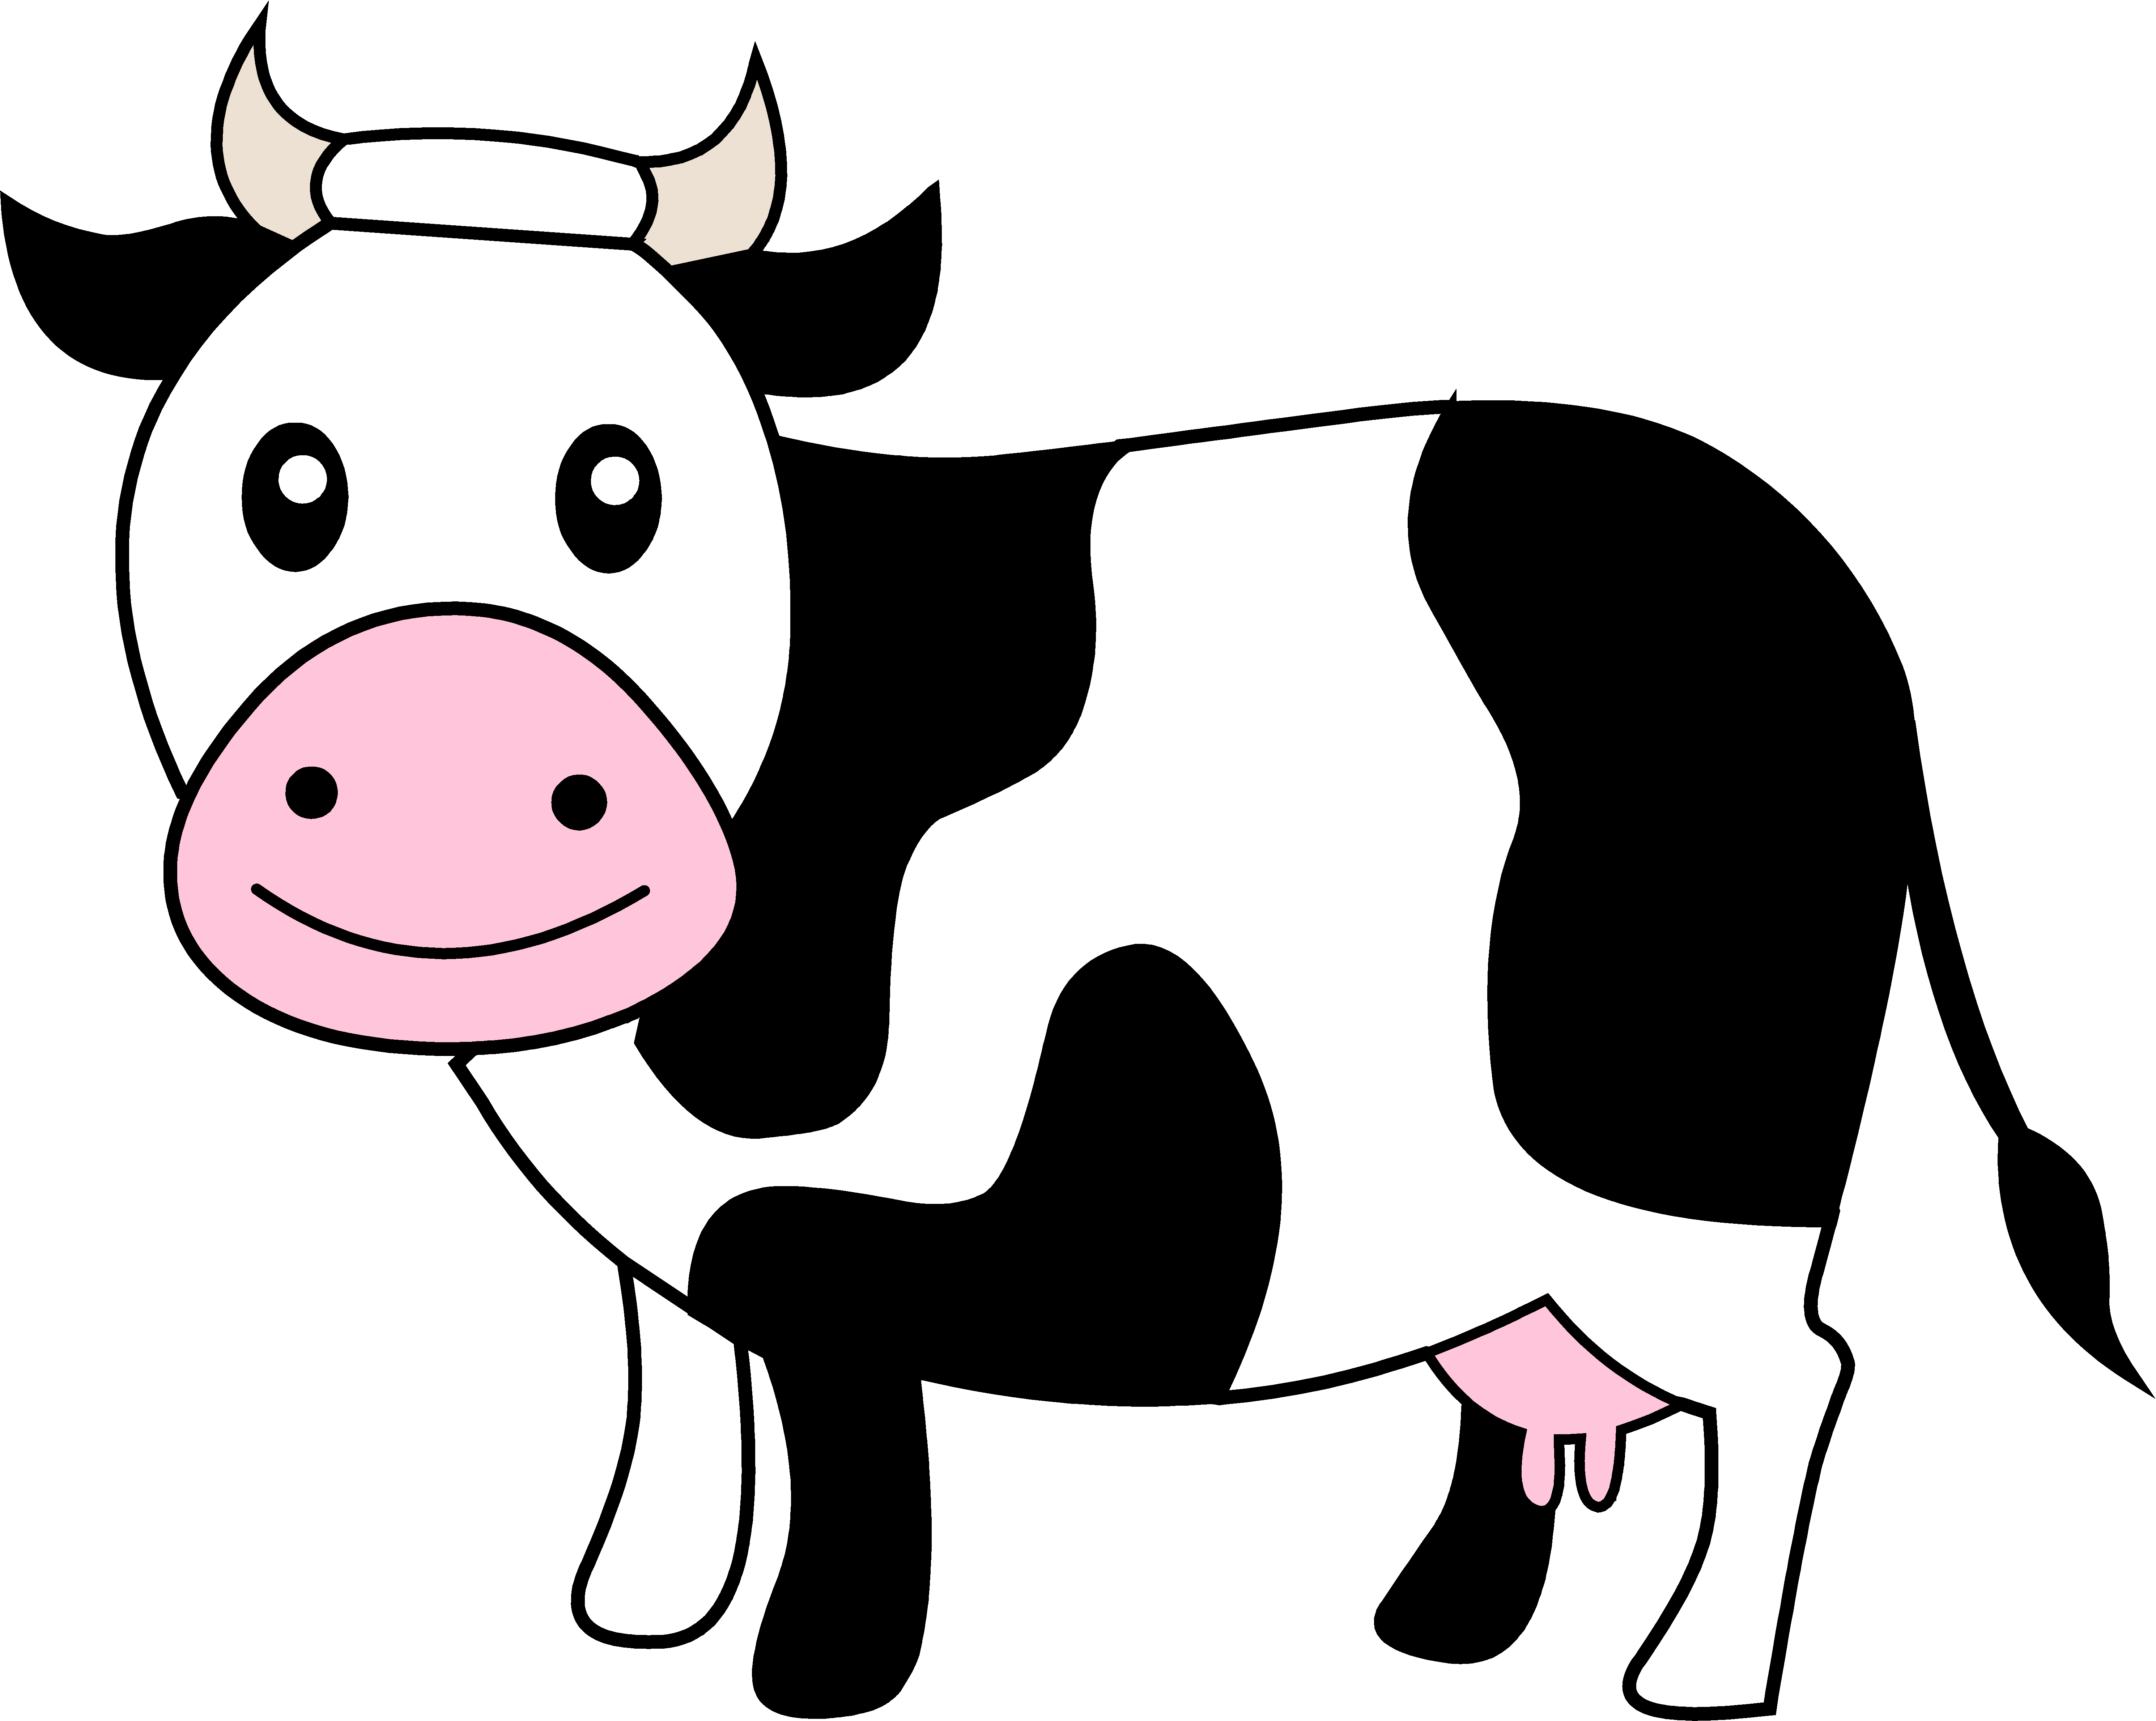 Cow clipart #2, Download drawings